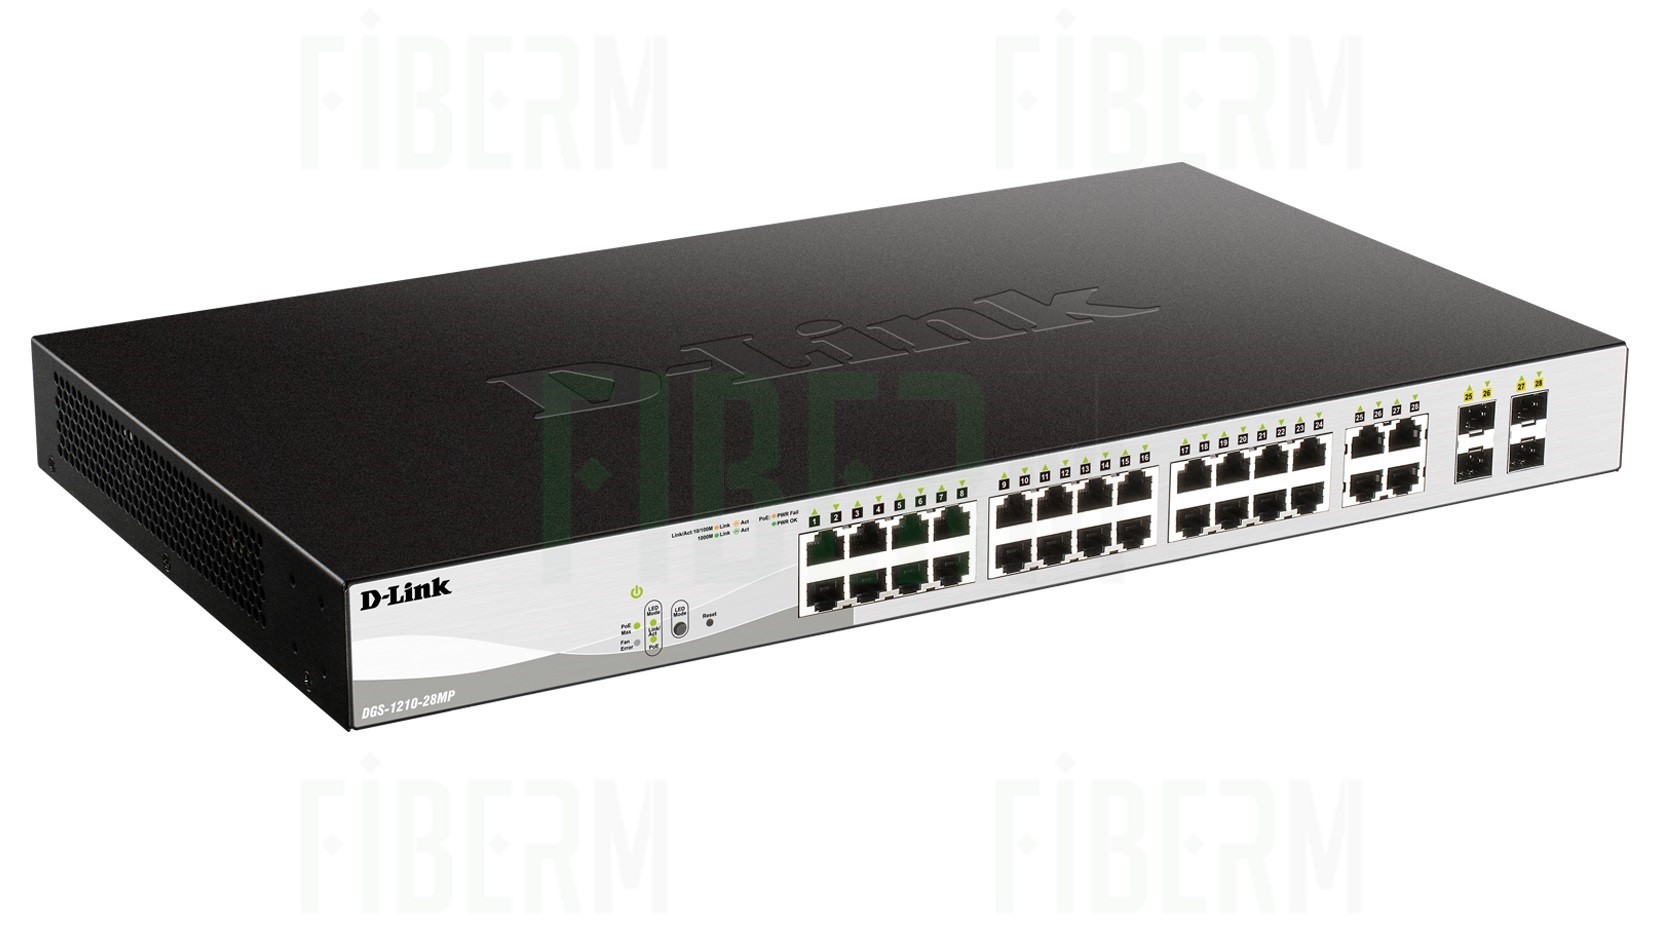 D-LINK DGS-1210-28MP - Managed Switch 24 x 10/100/1000 PoE + 4 x SFP